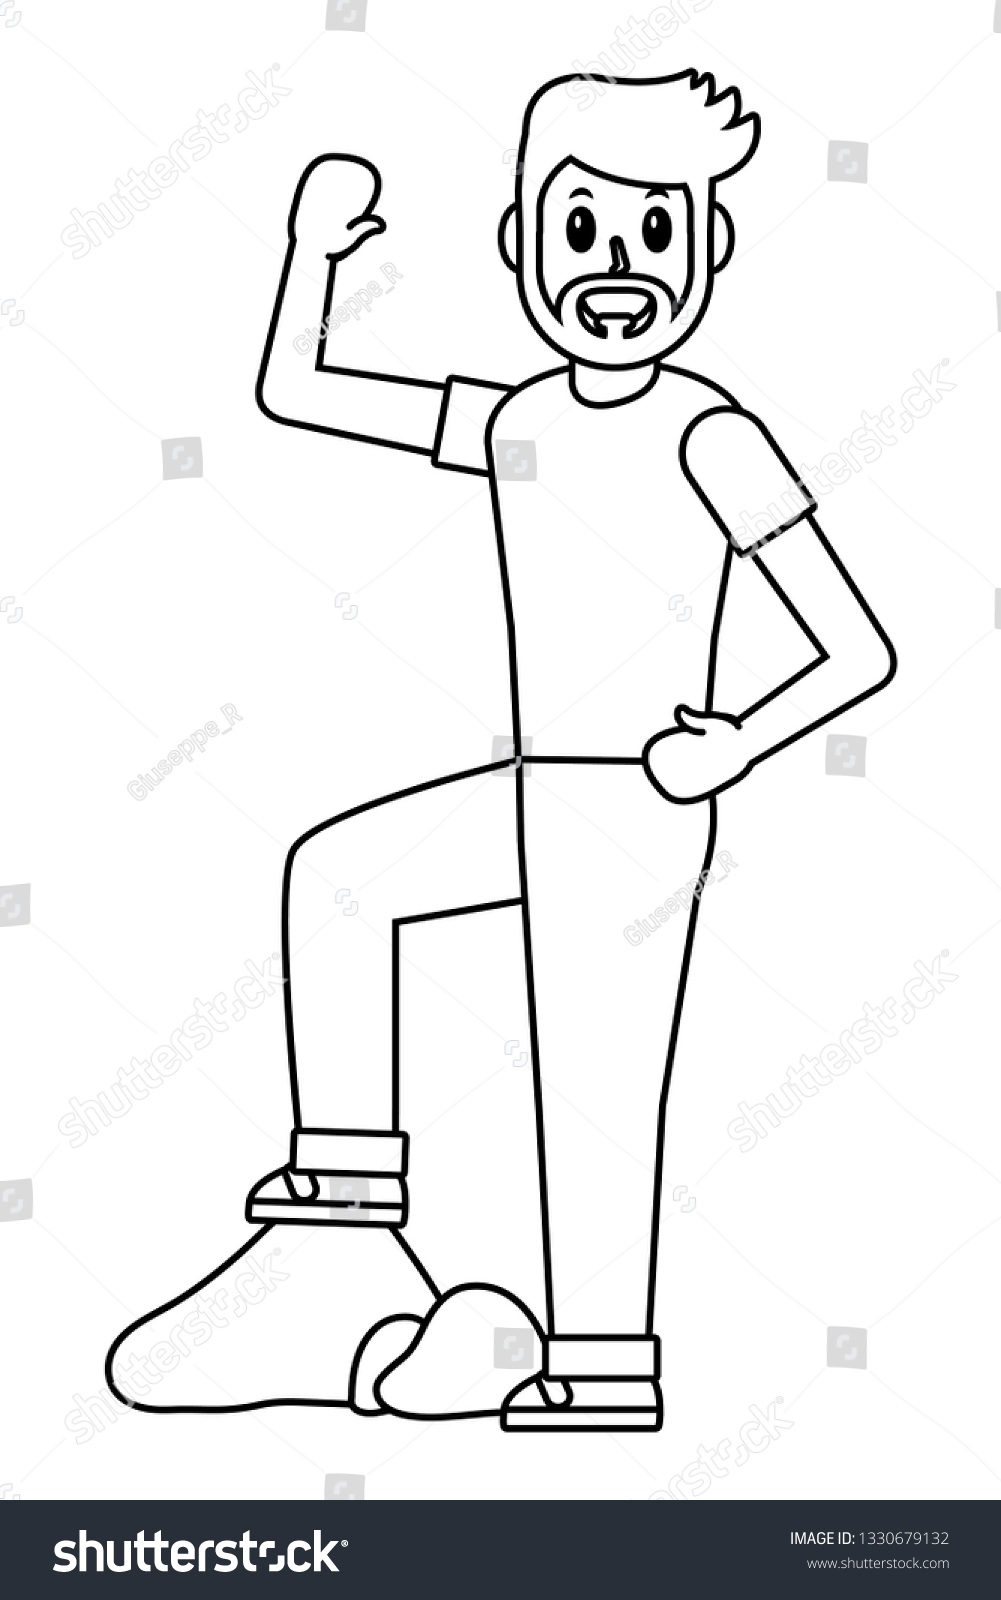 man body cartoon in black and white #1330679132